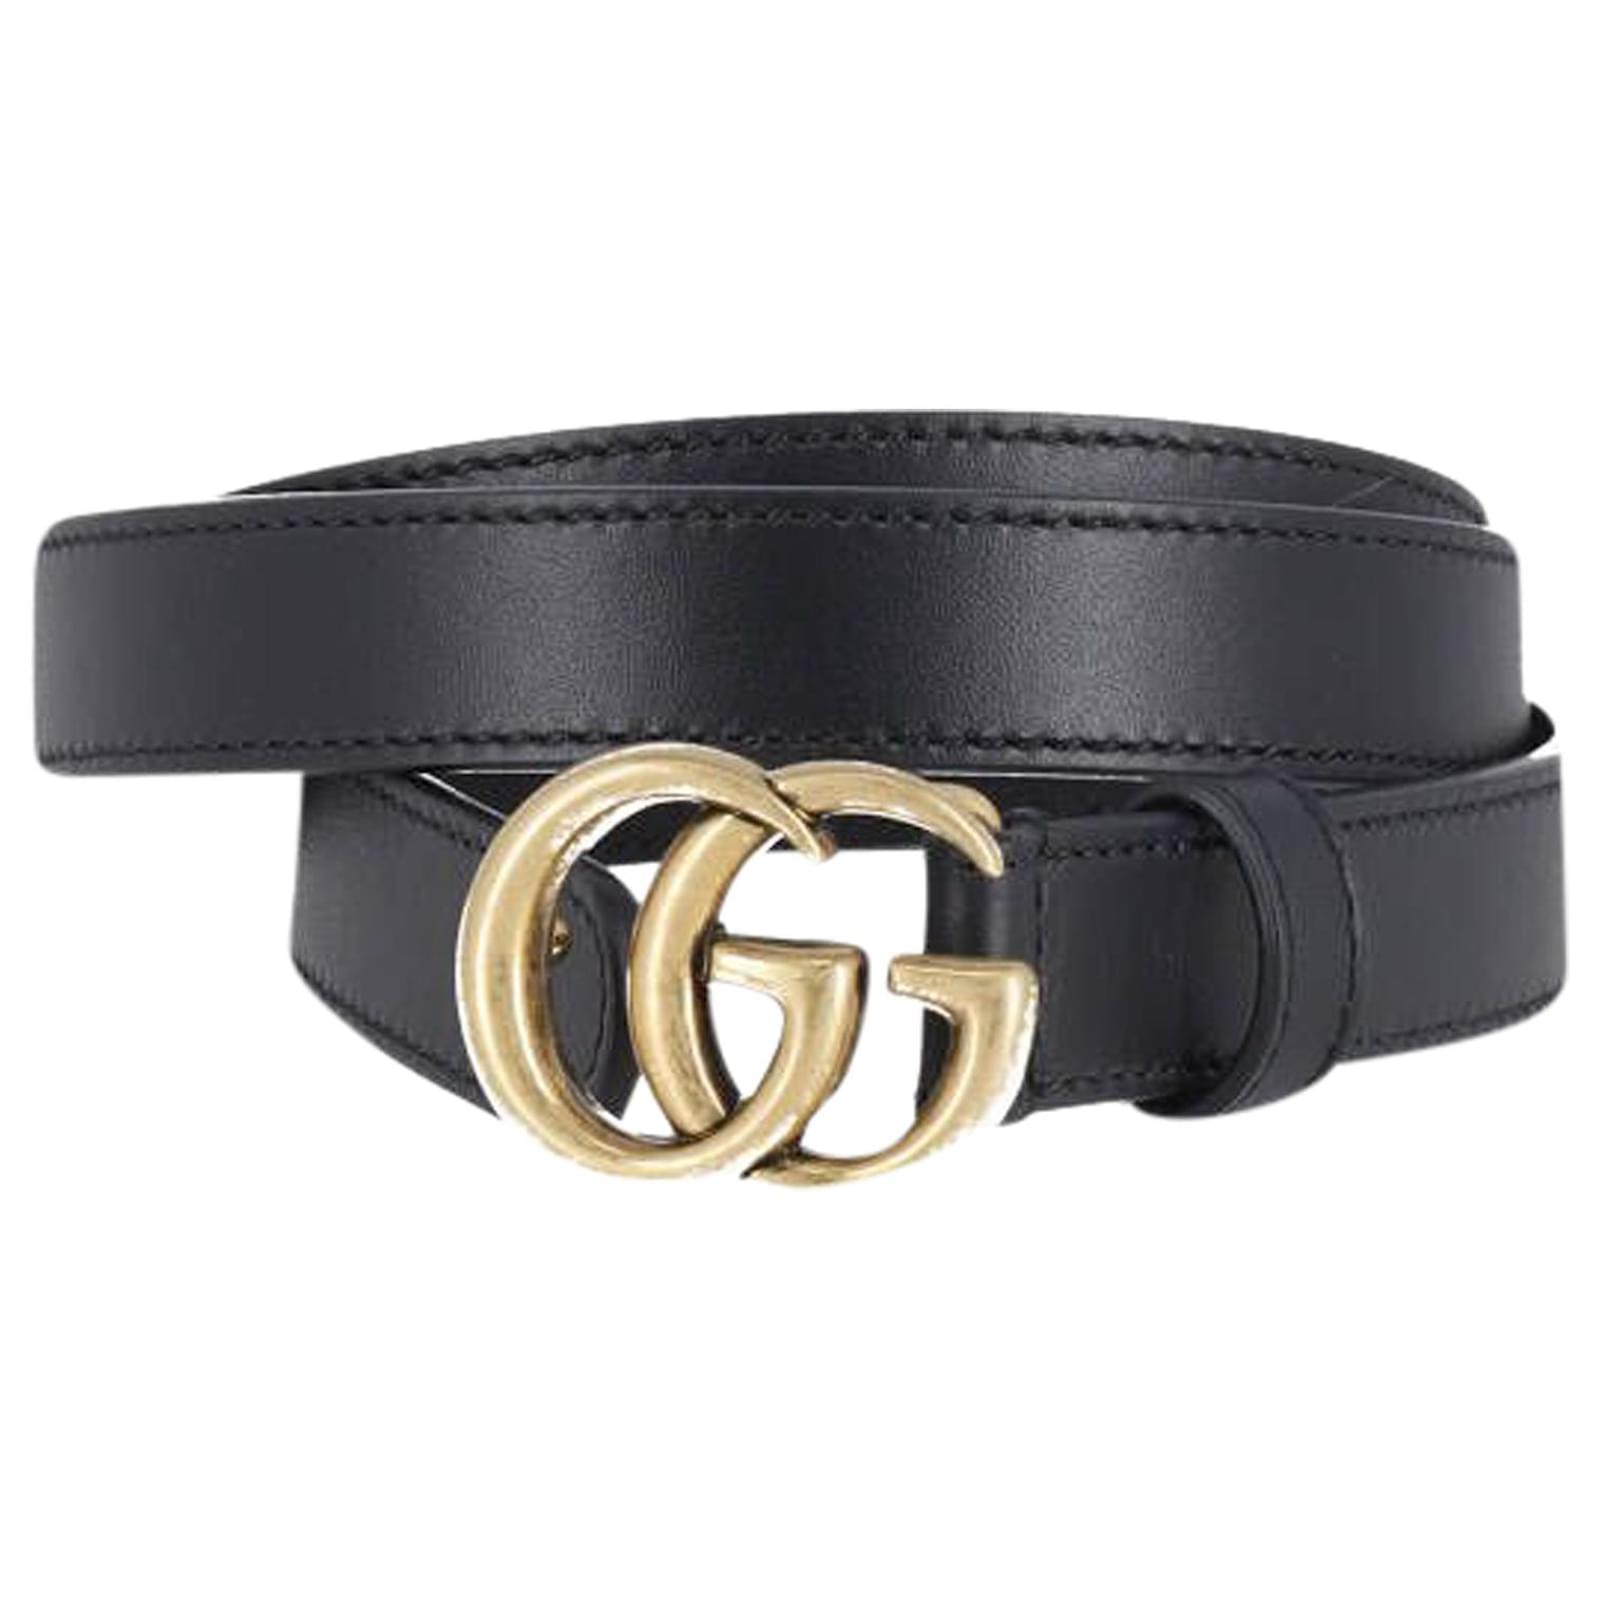 Gucci - Men's Belt with Double G Buckle - Black - Leather